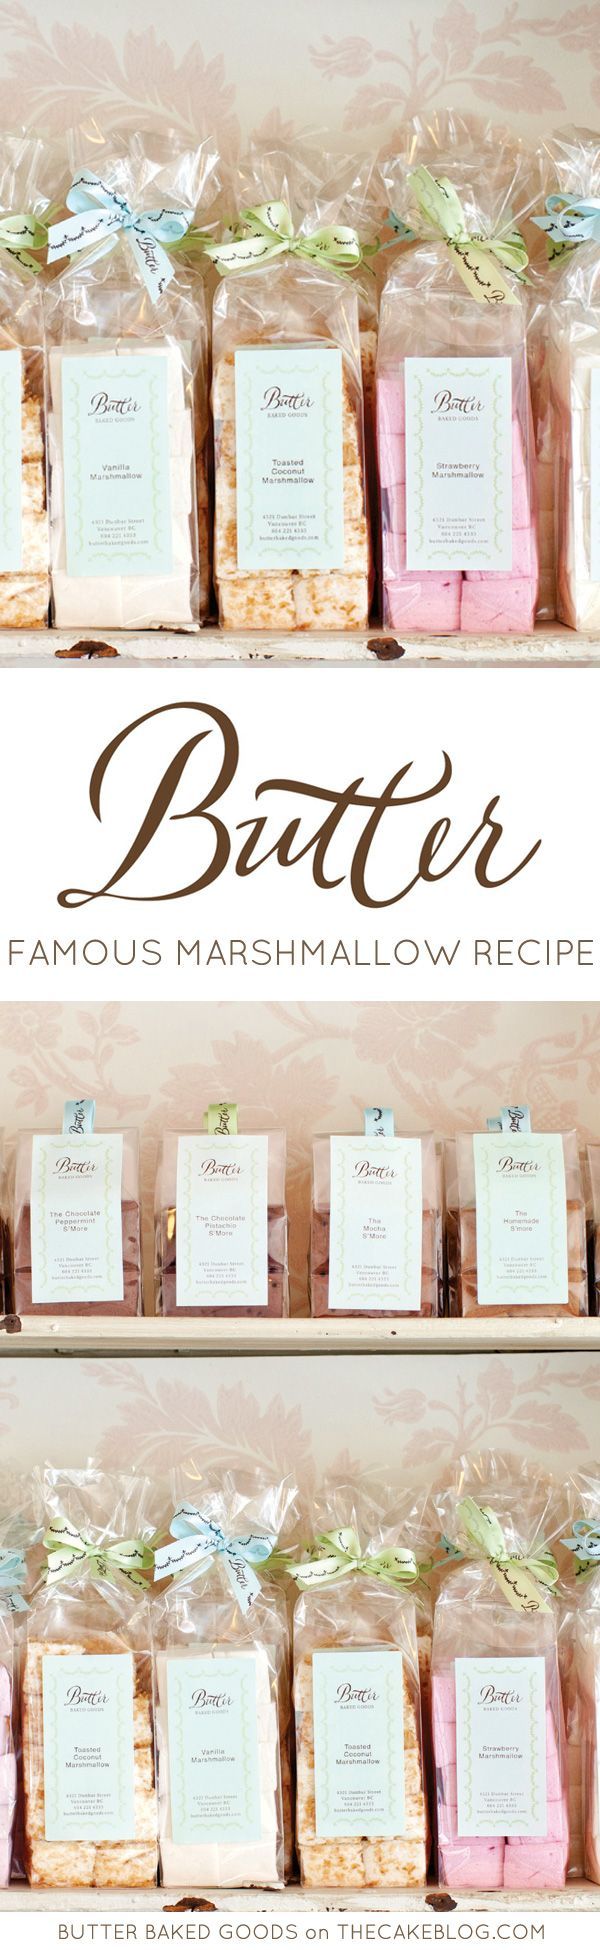 Learn how to make these famously gourmet marshmallows from Butter Baked Goods. A recipe perfect for holiday baking. From the new